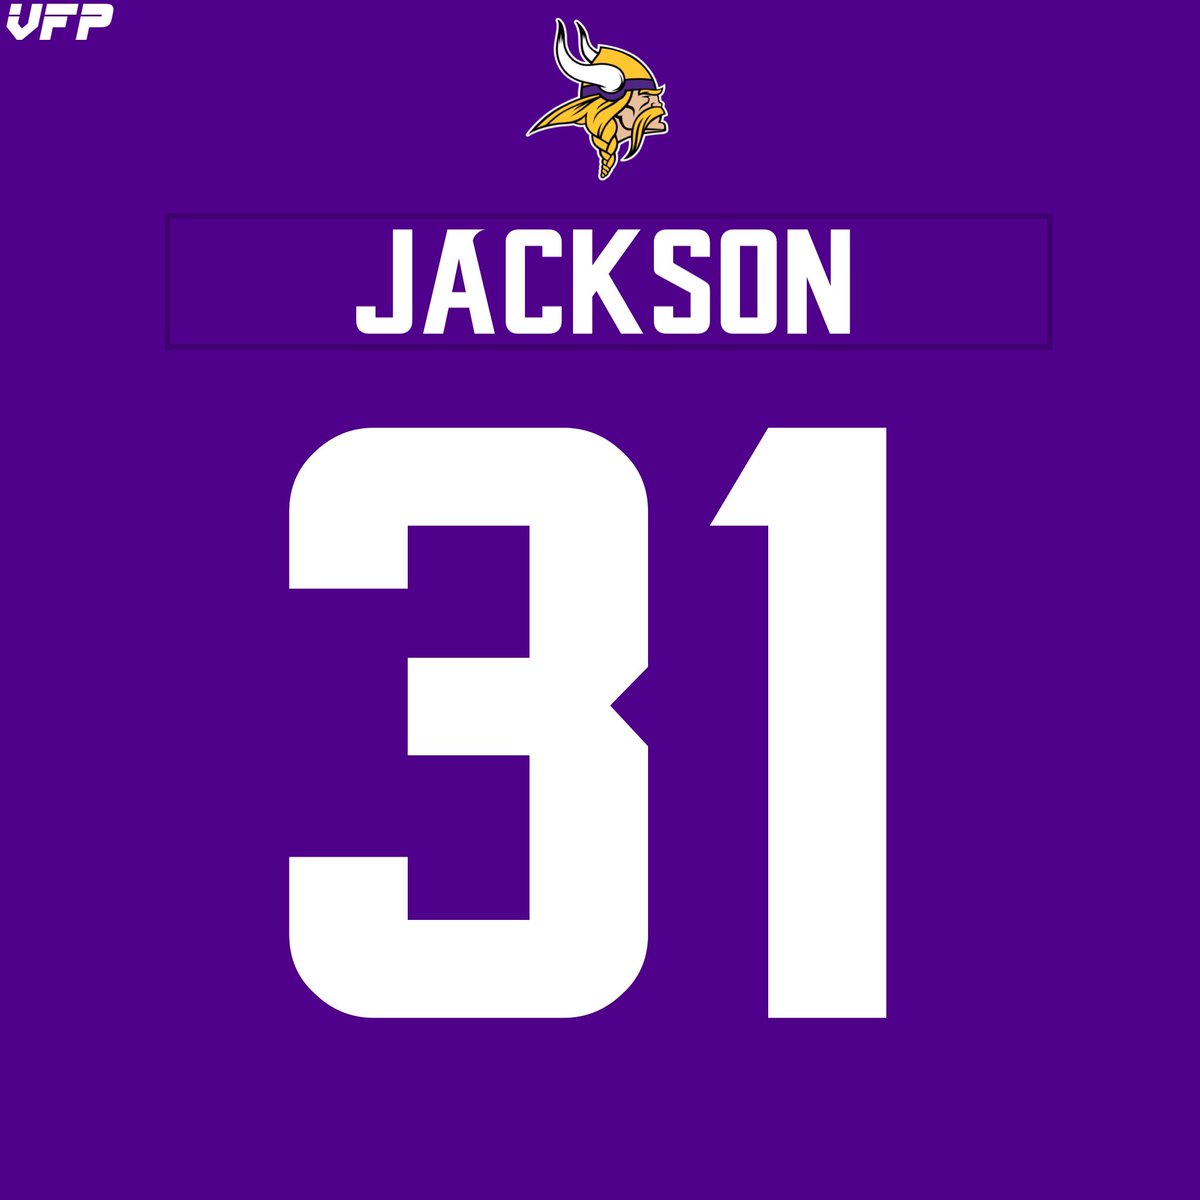 The remaining of the Vikings draft class will wear these jersey numbers: 31 - Khyree Jackson 78 - Walter Rouse 46 - Will Reichard 65 - Michael Jurgens 50 - Levi Drake Rodriguez #Skol